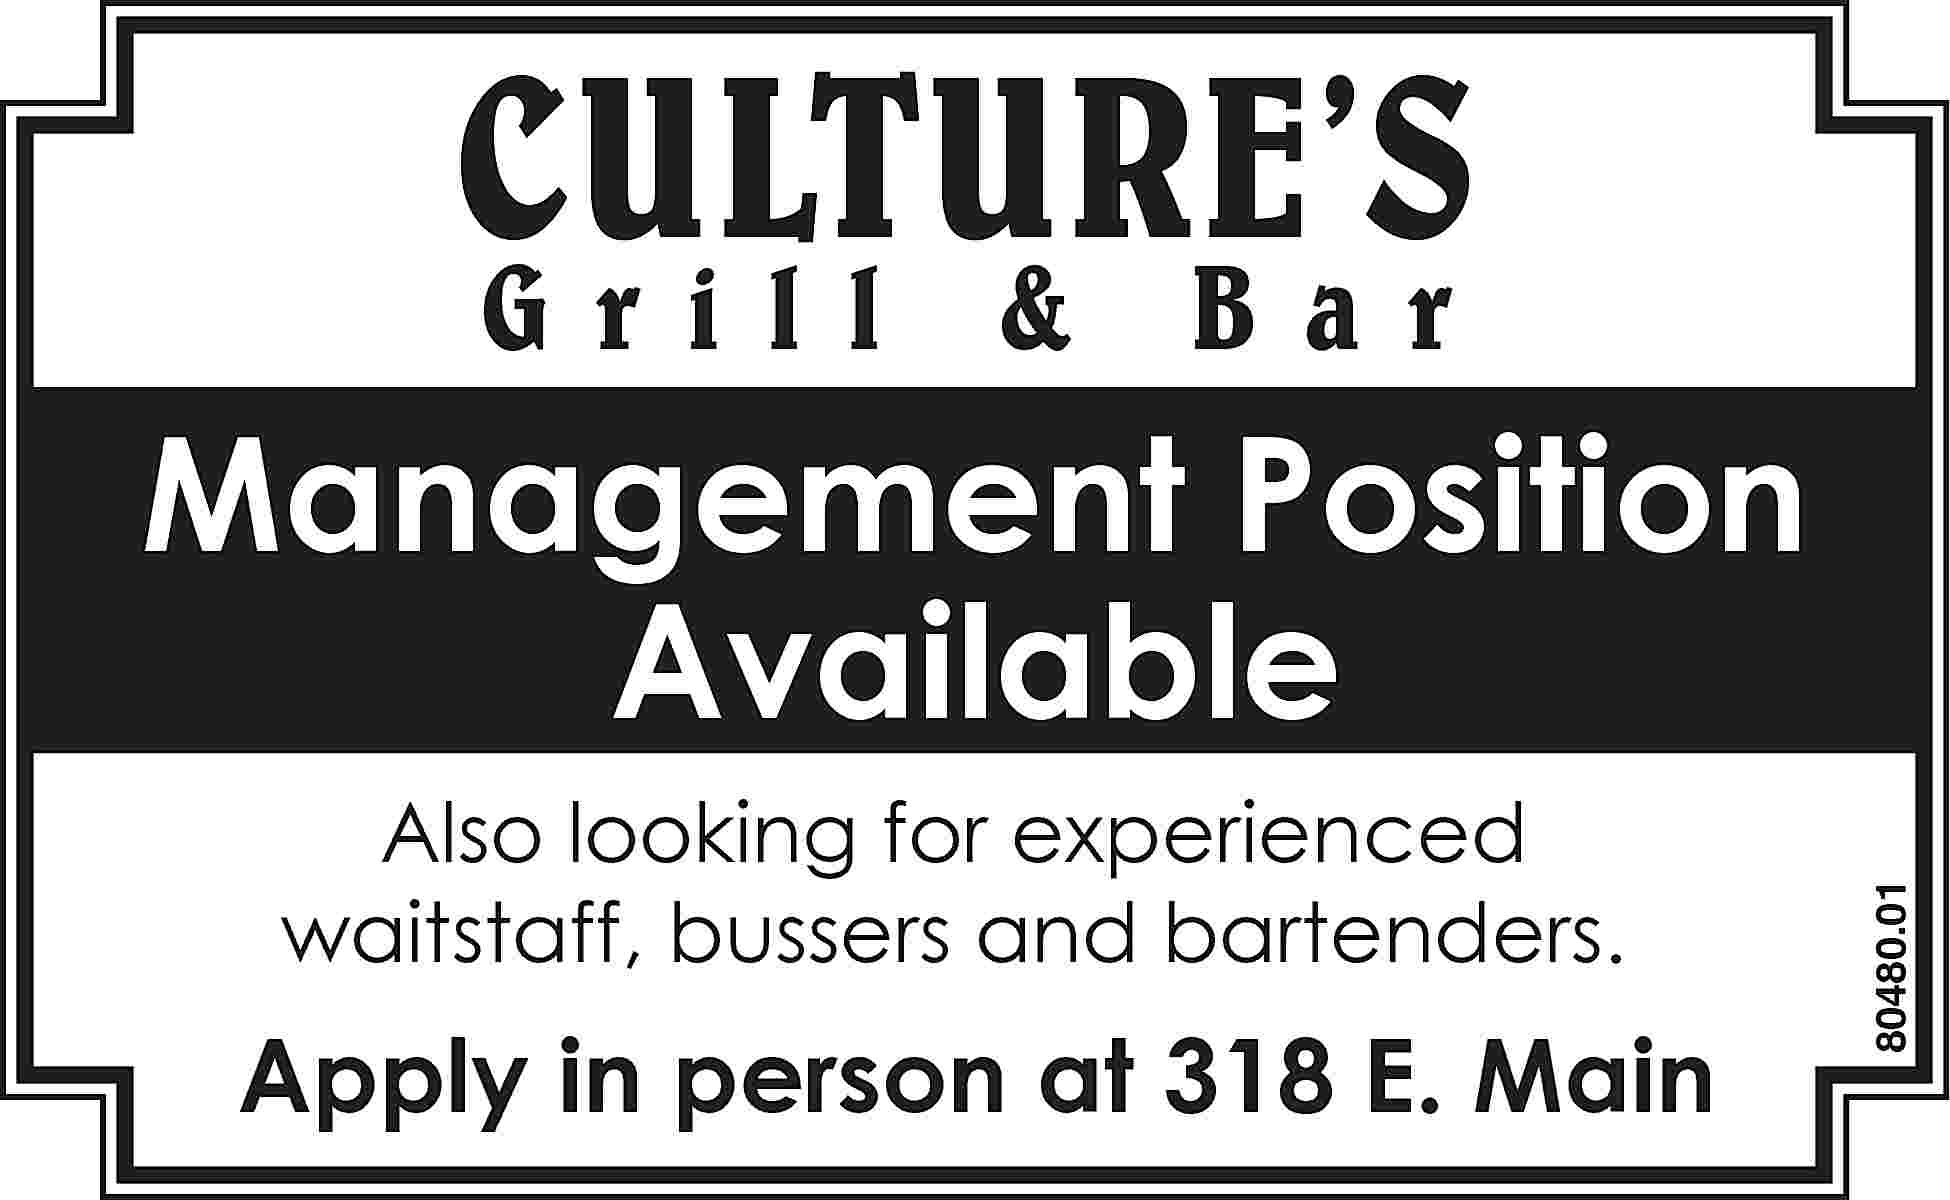 CULTURE’S Grill & Bar Also  CULTURE’S Grill & Bar Also looking for experienced waitstaff, bussers and bartenders. Apply in person at 318 E. Main 80480.01 Management Position Available